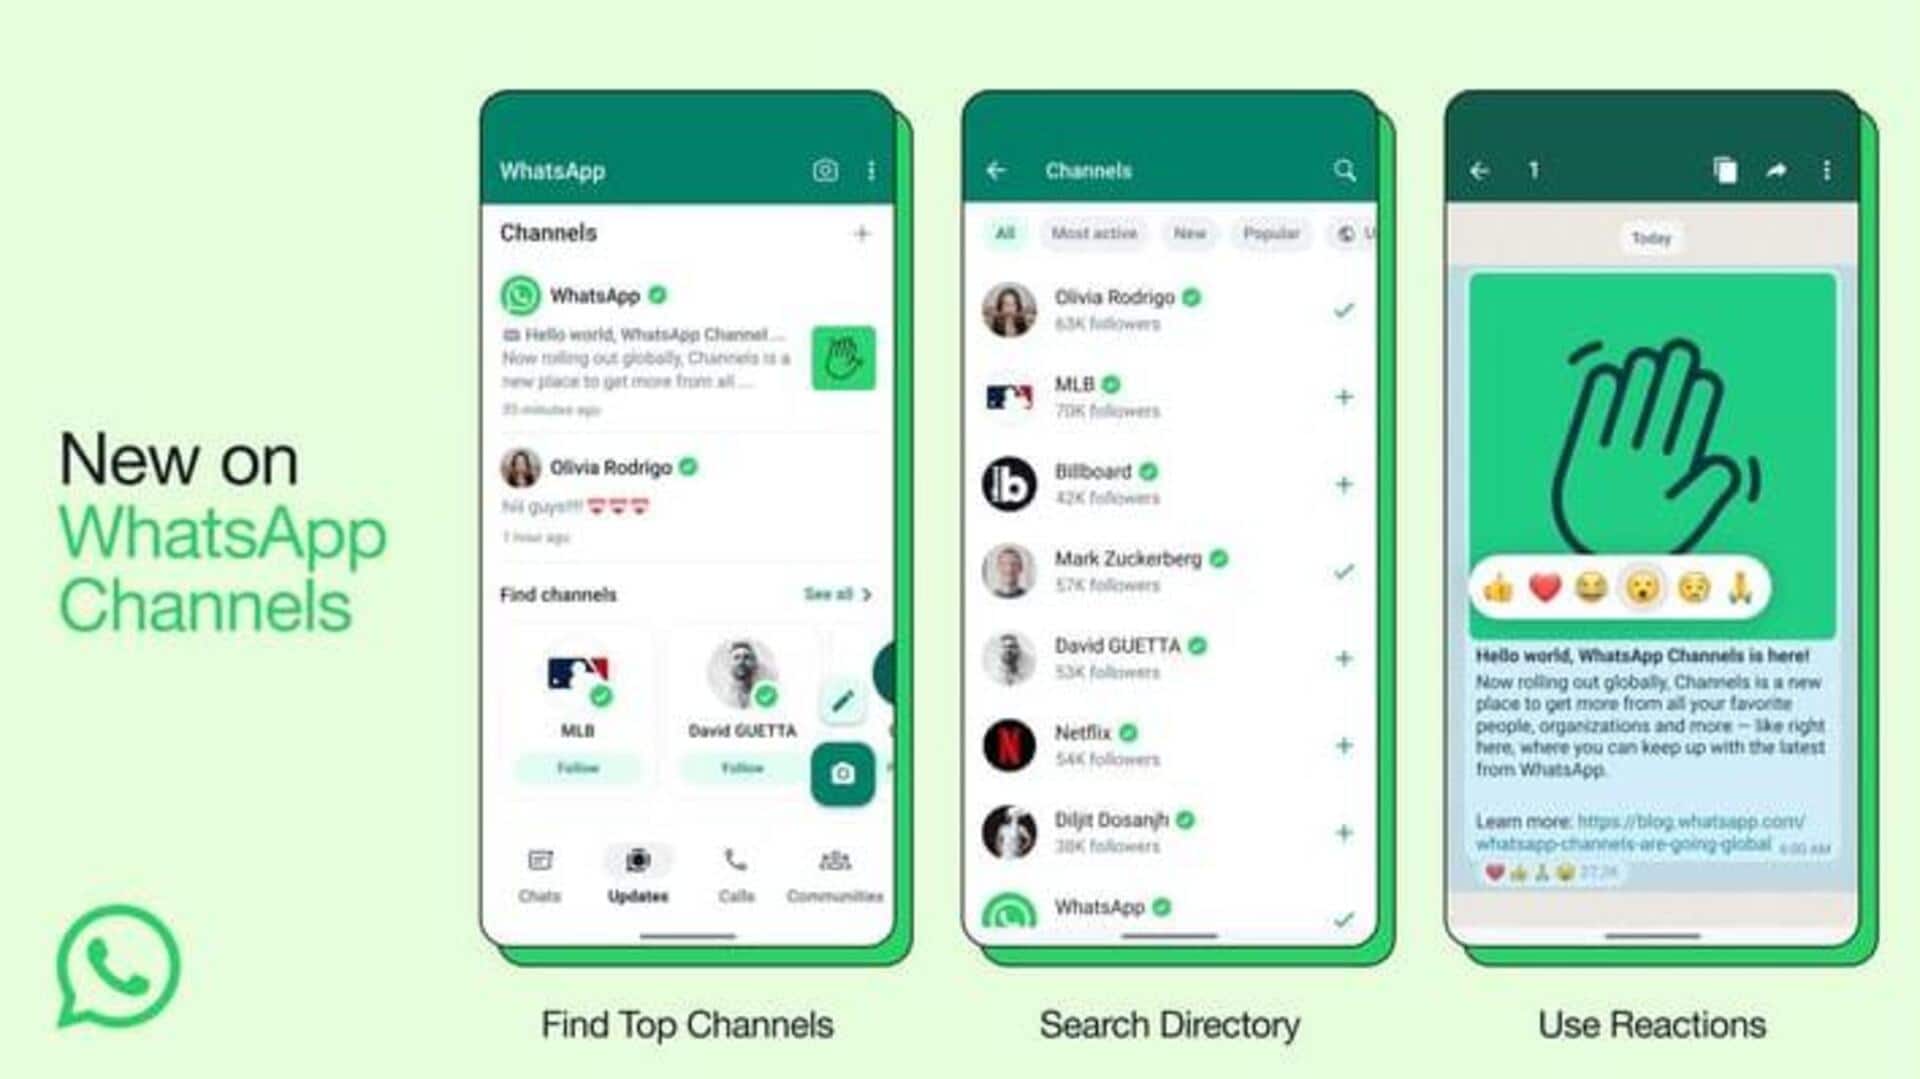 WhatsApp now allows iPhone users to create Channels